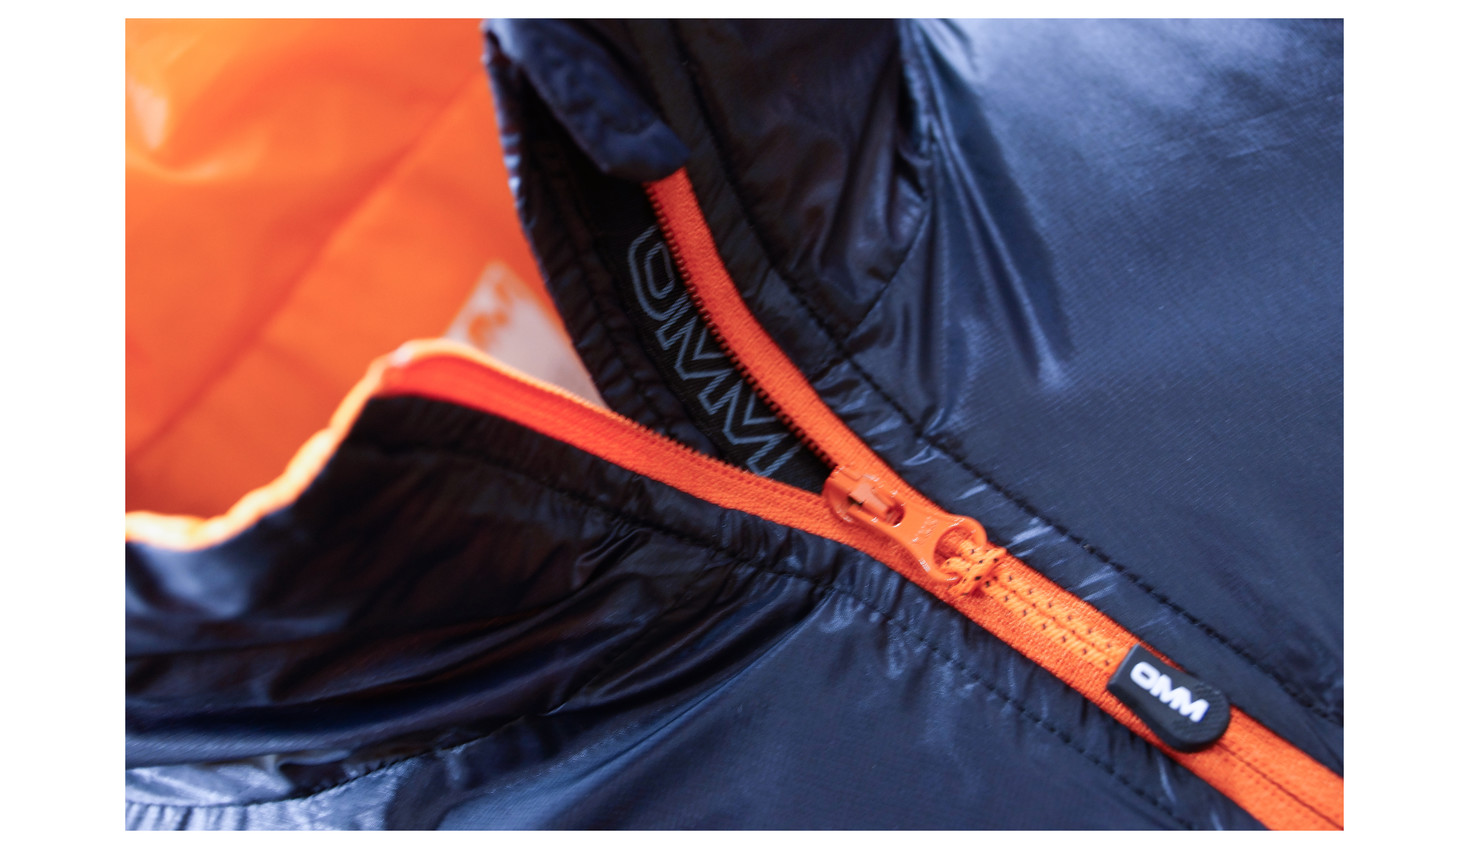 The Omm Rotor smock - Backpackinglight.dk